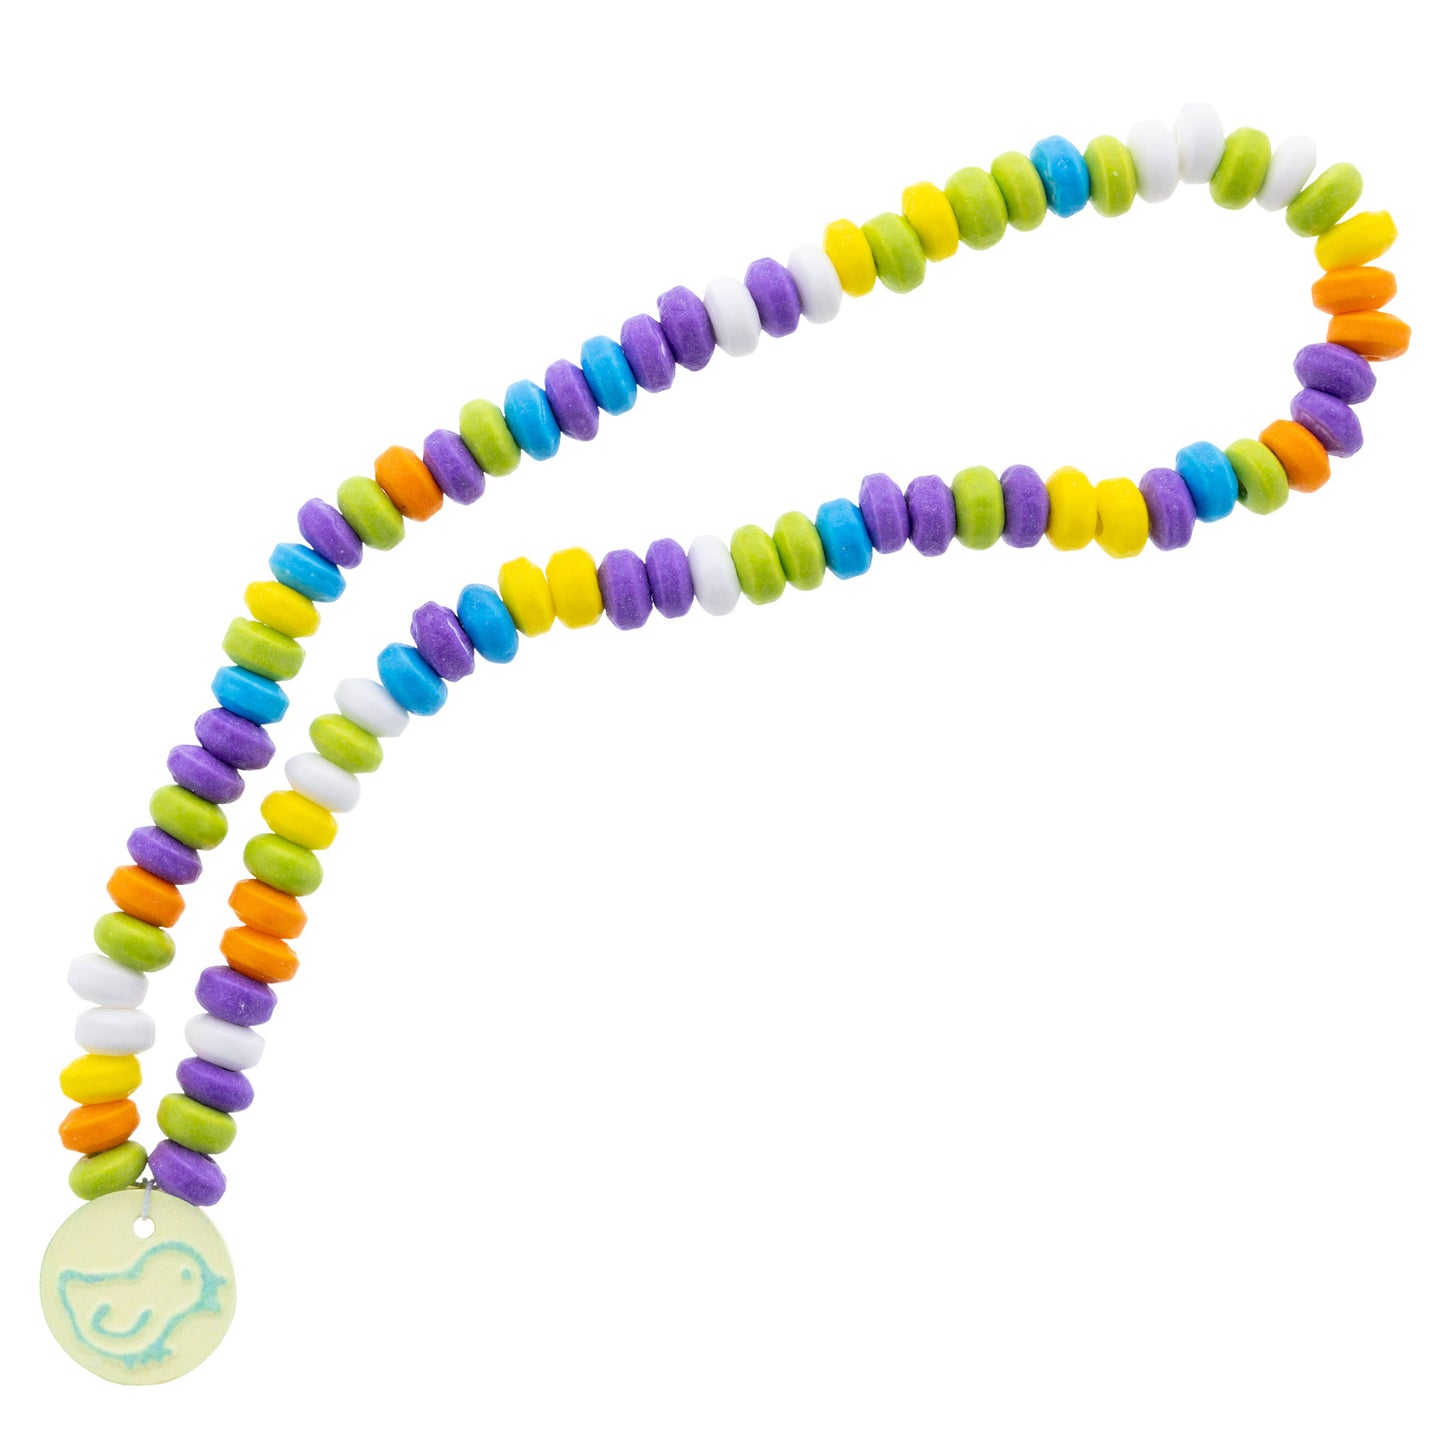 Galerie Candy and Gifts - Galerie Candy Necklace (Case of 24)